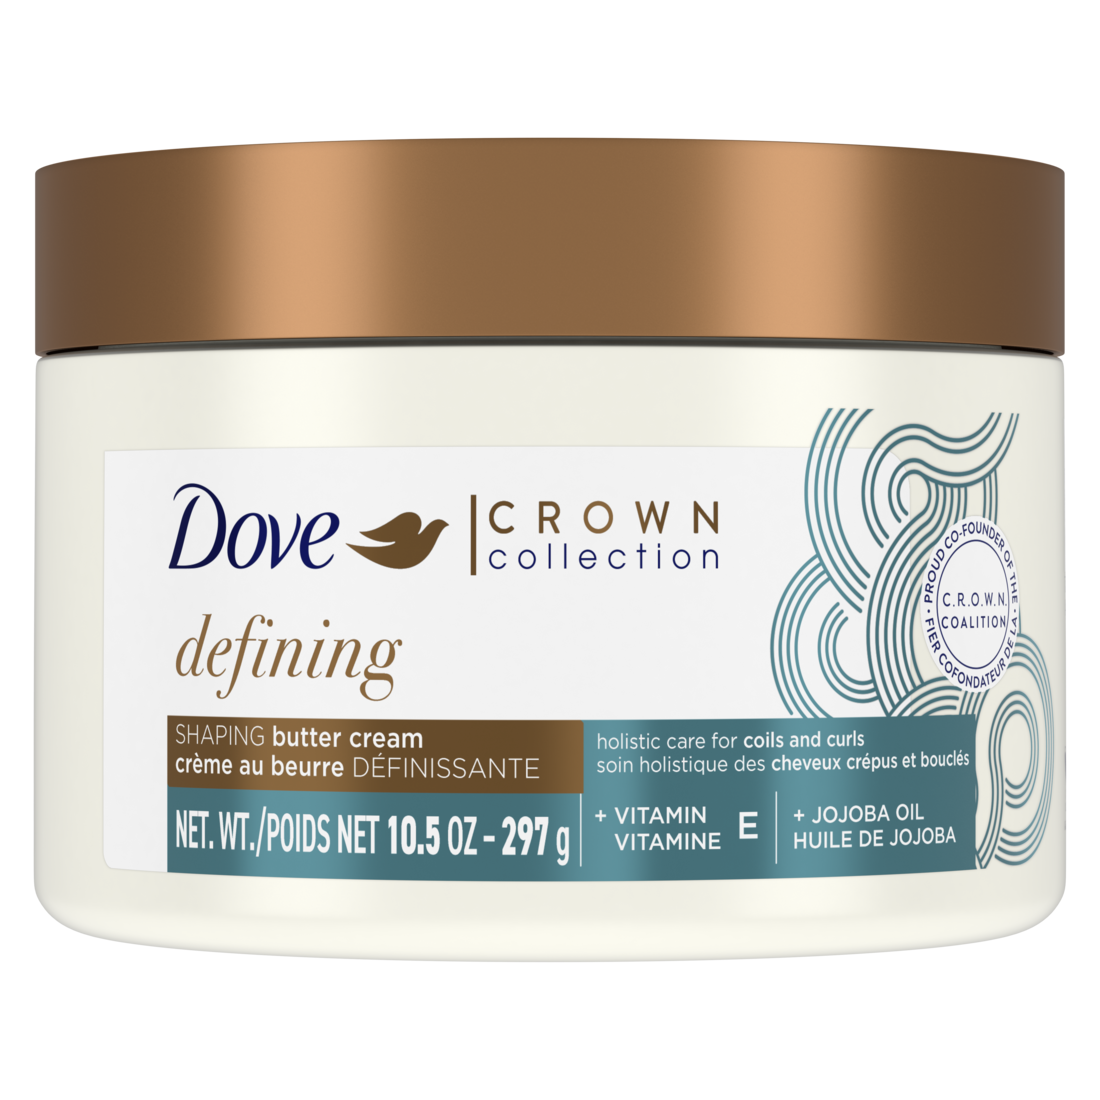 Dove CROWN Collection Defining Shaping Butter Cream 297g